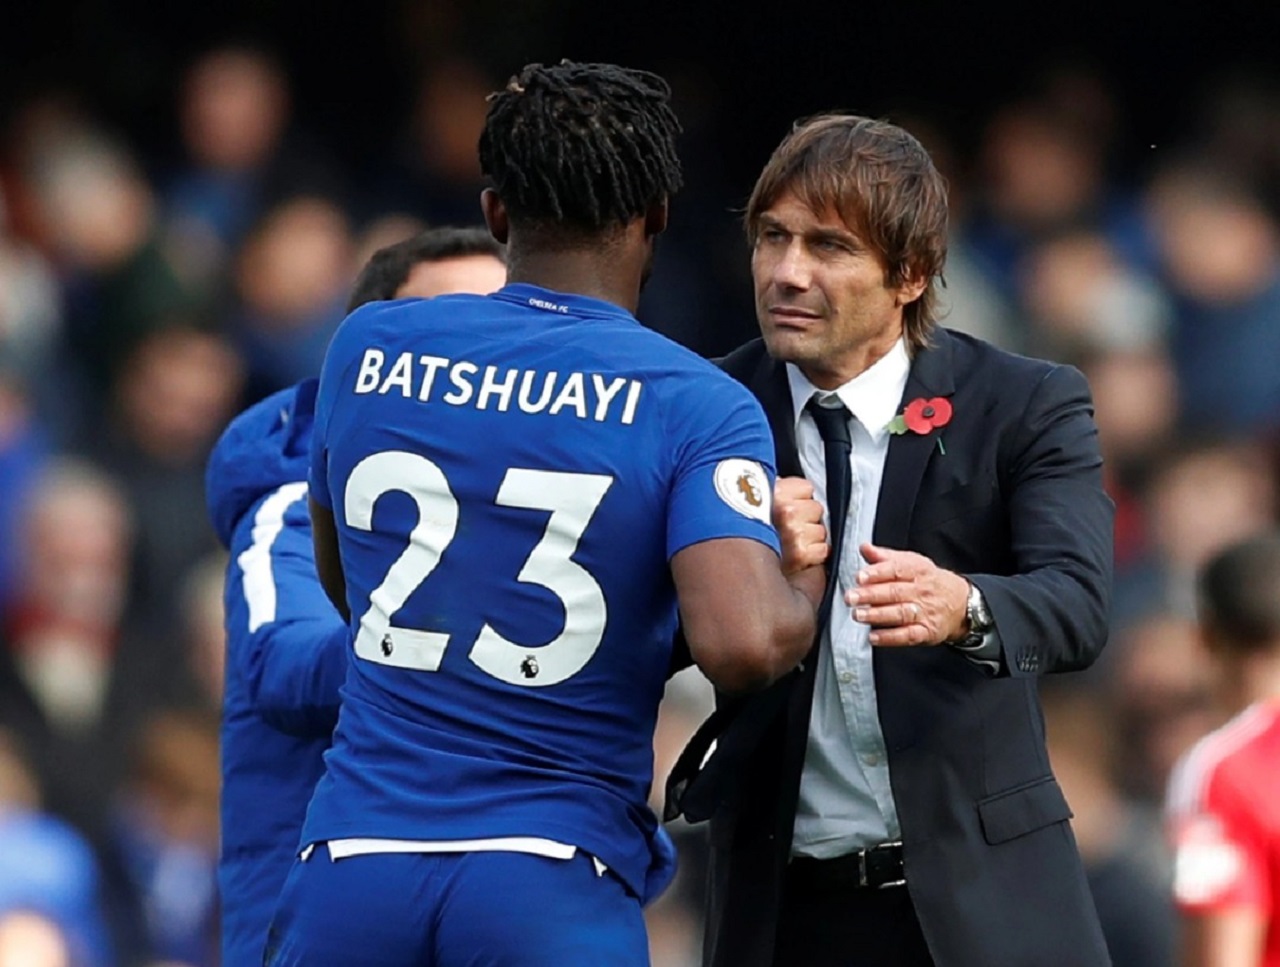 How Conte deceived, fooled me – Ex-Chelsea star